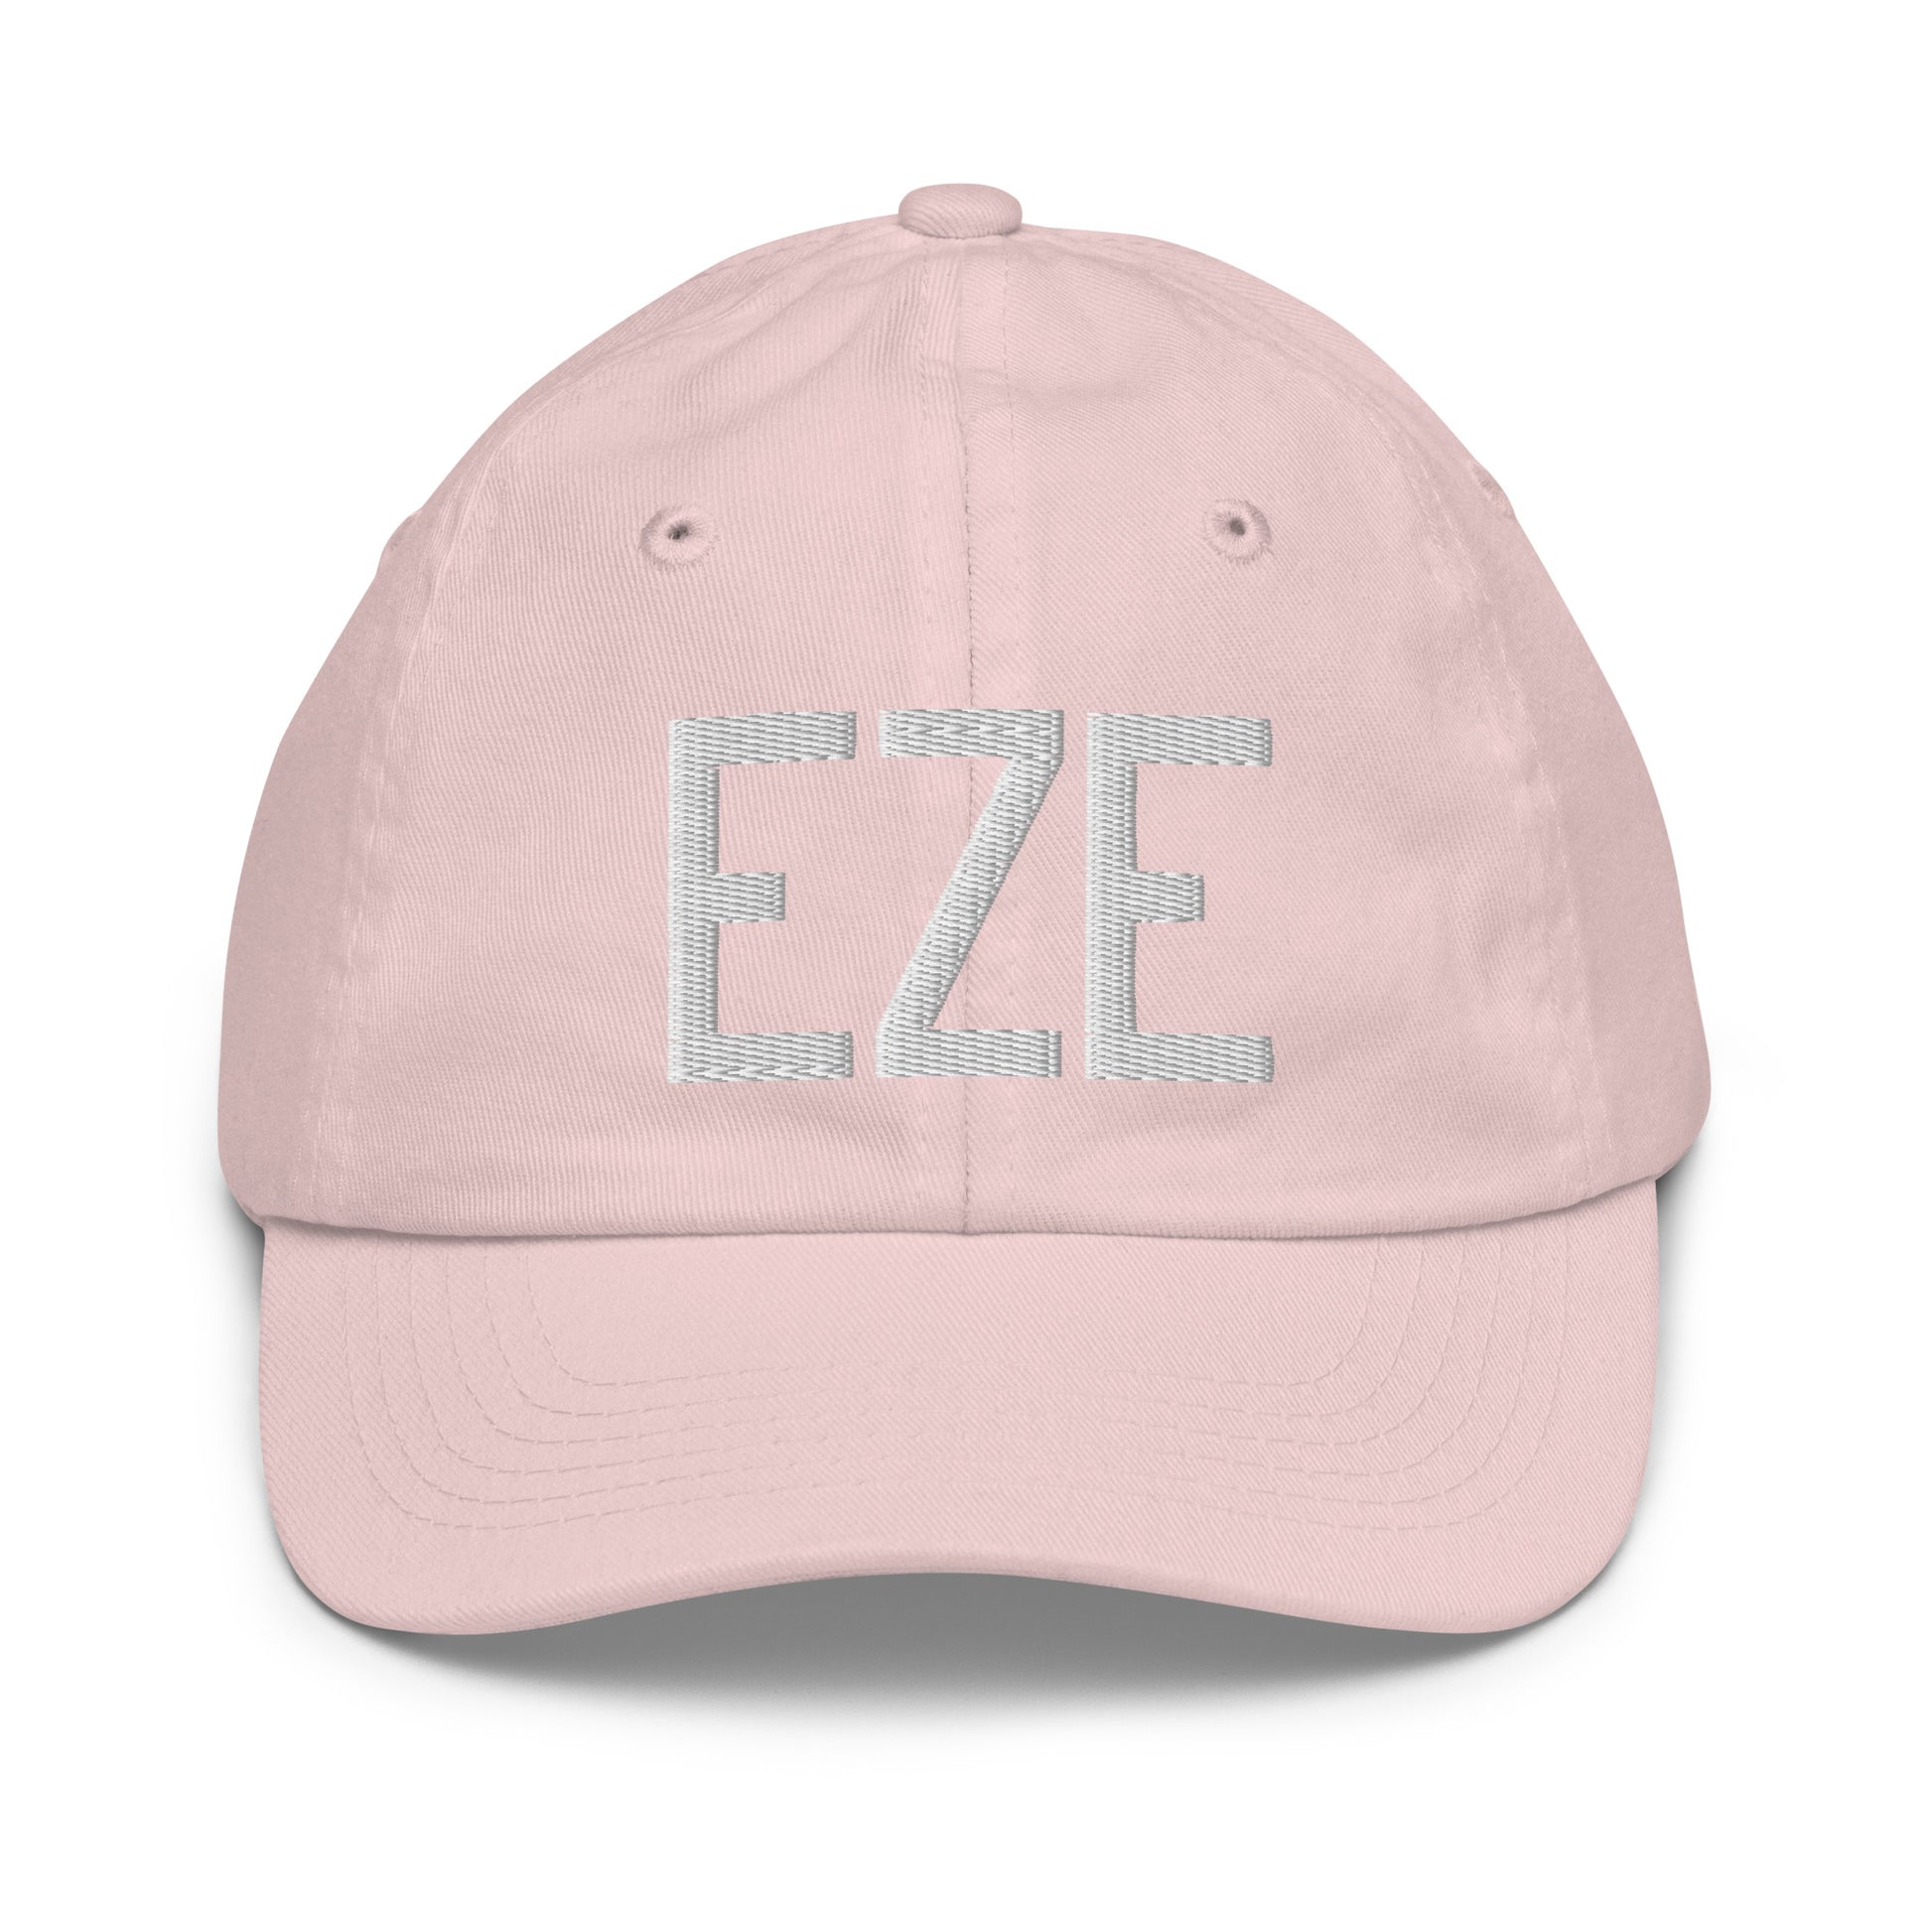 Airport Code Kid's Baseball Cap - White • EZE Buenos Aires • YHM Designs - Image 31